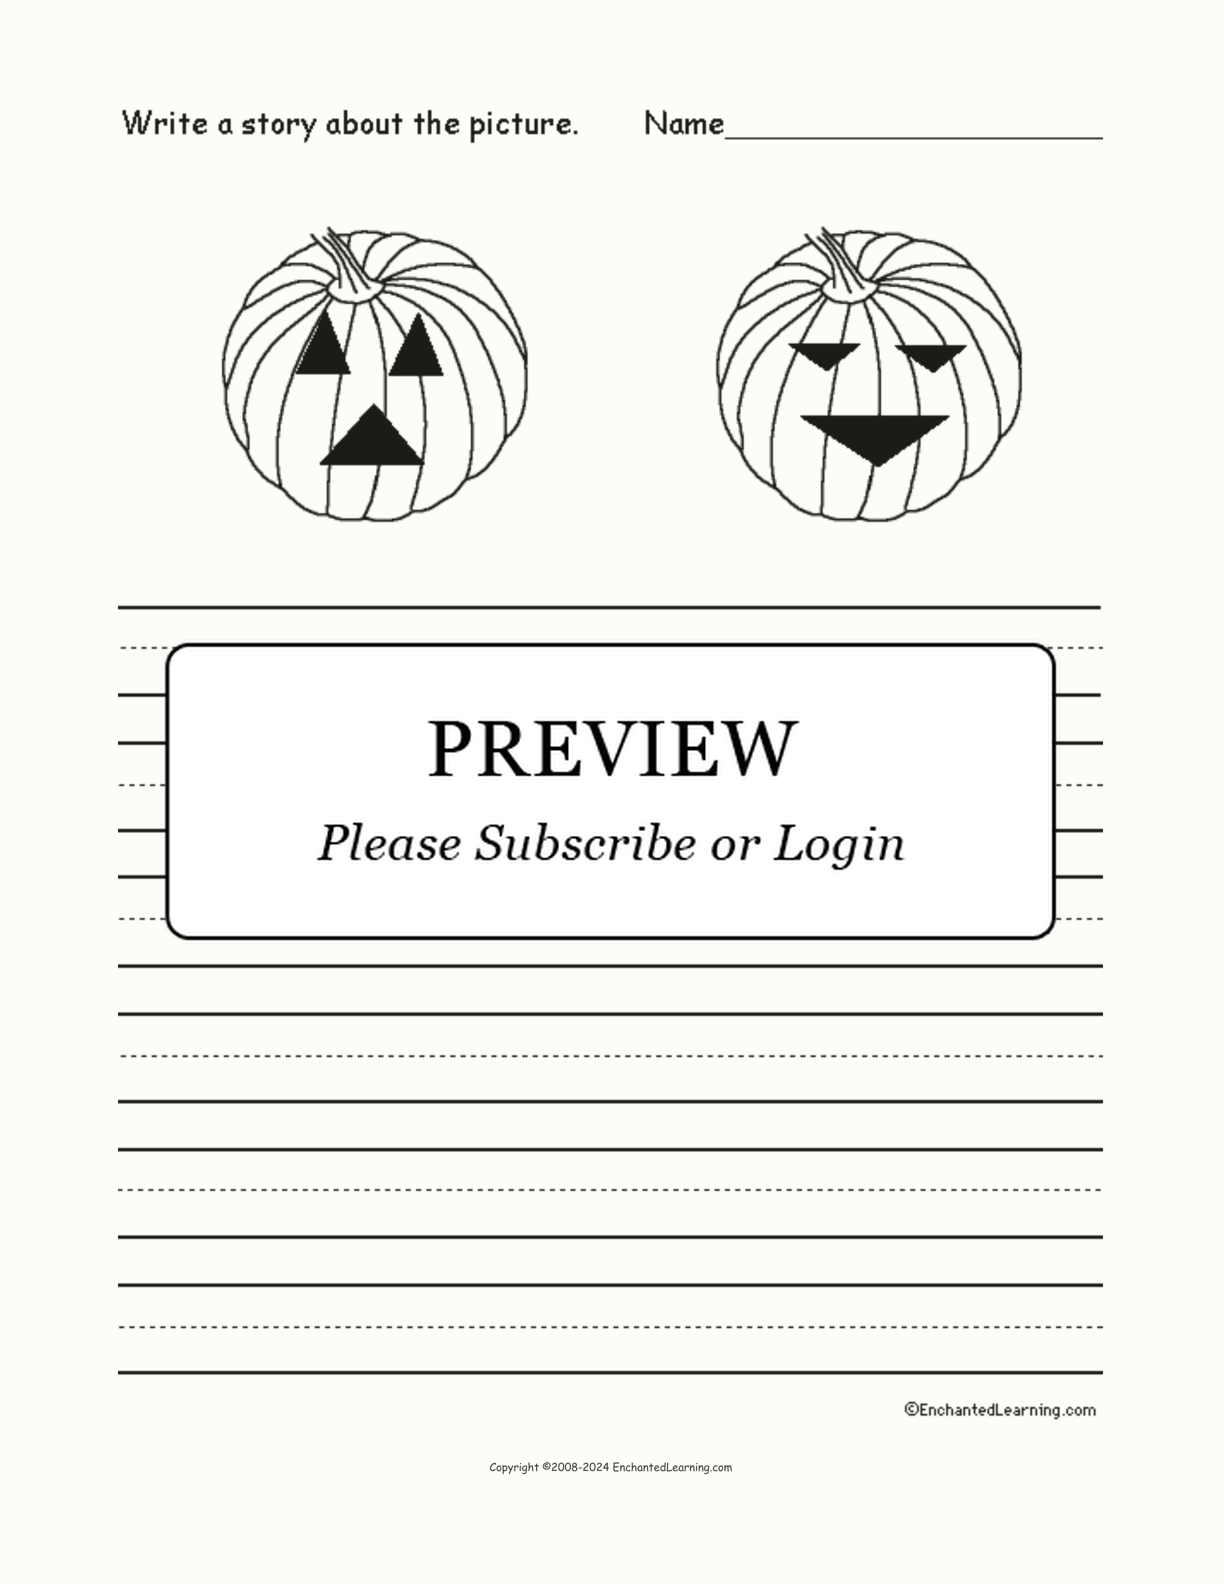 Picture Prompts - Jack-o'-Lanterns interactive worksheet page 1